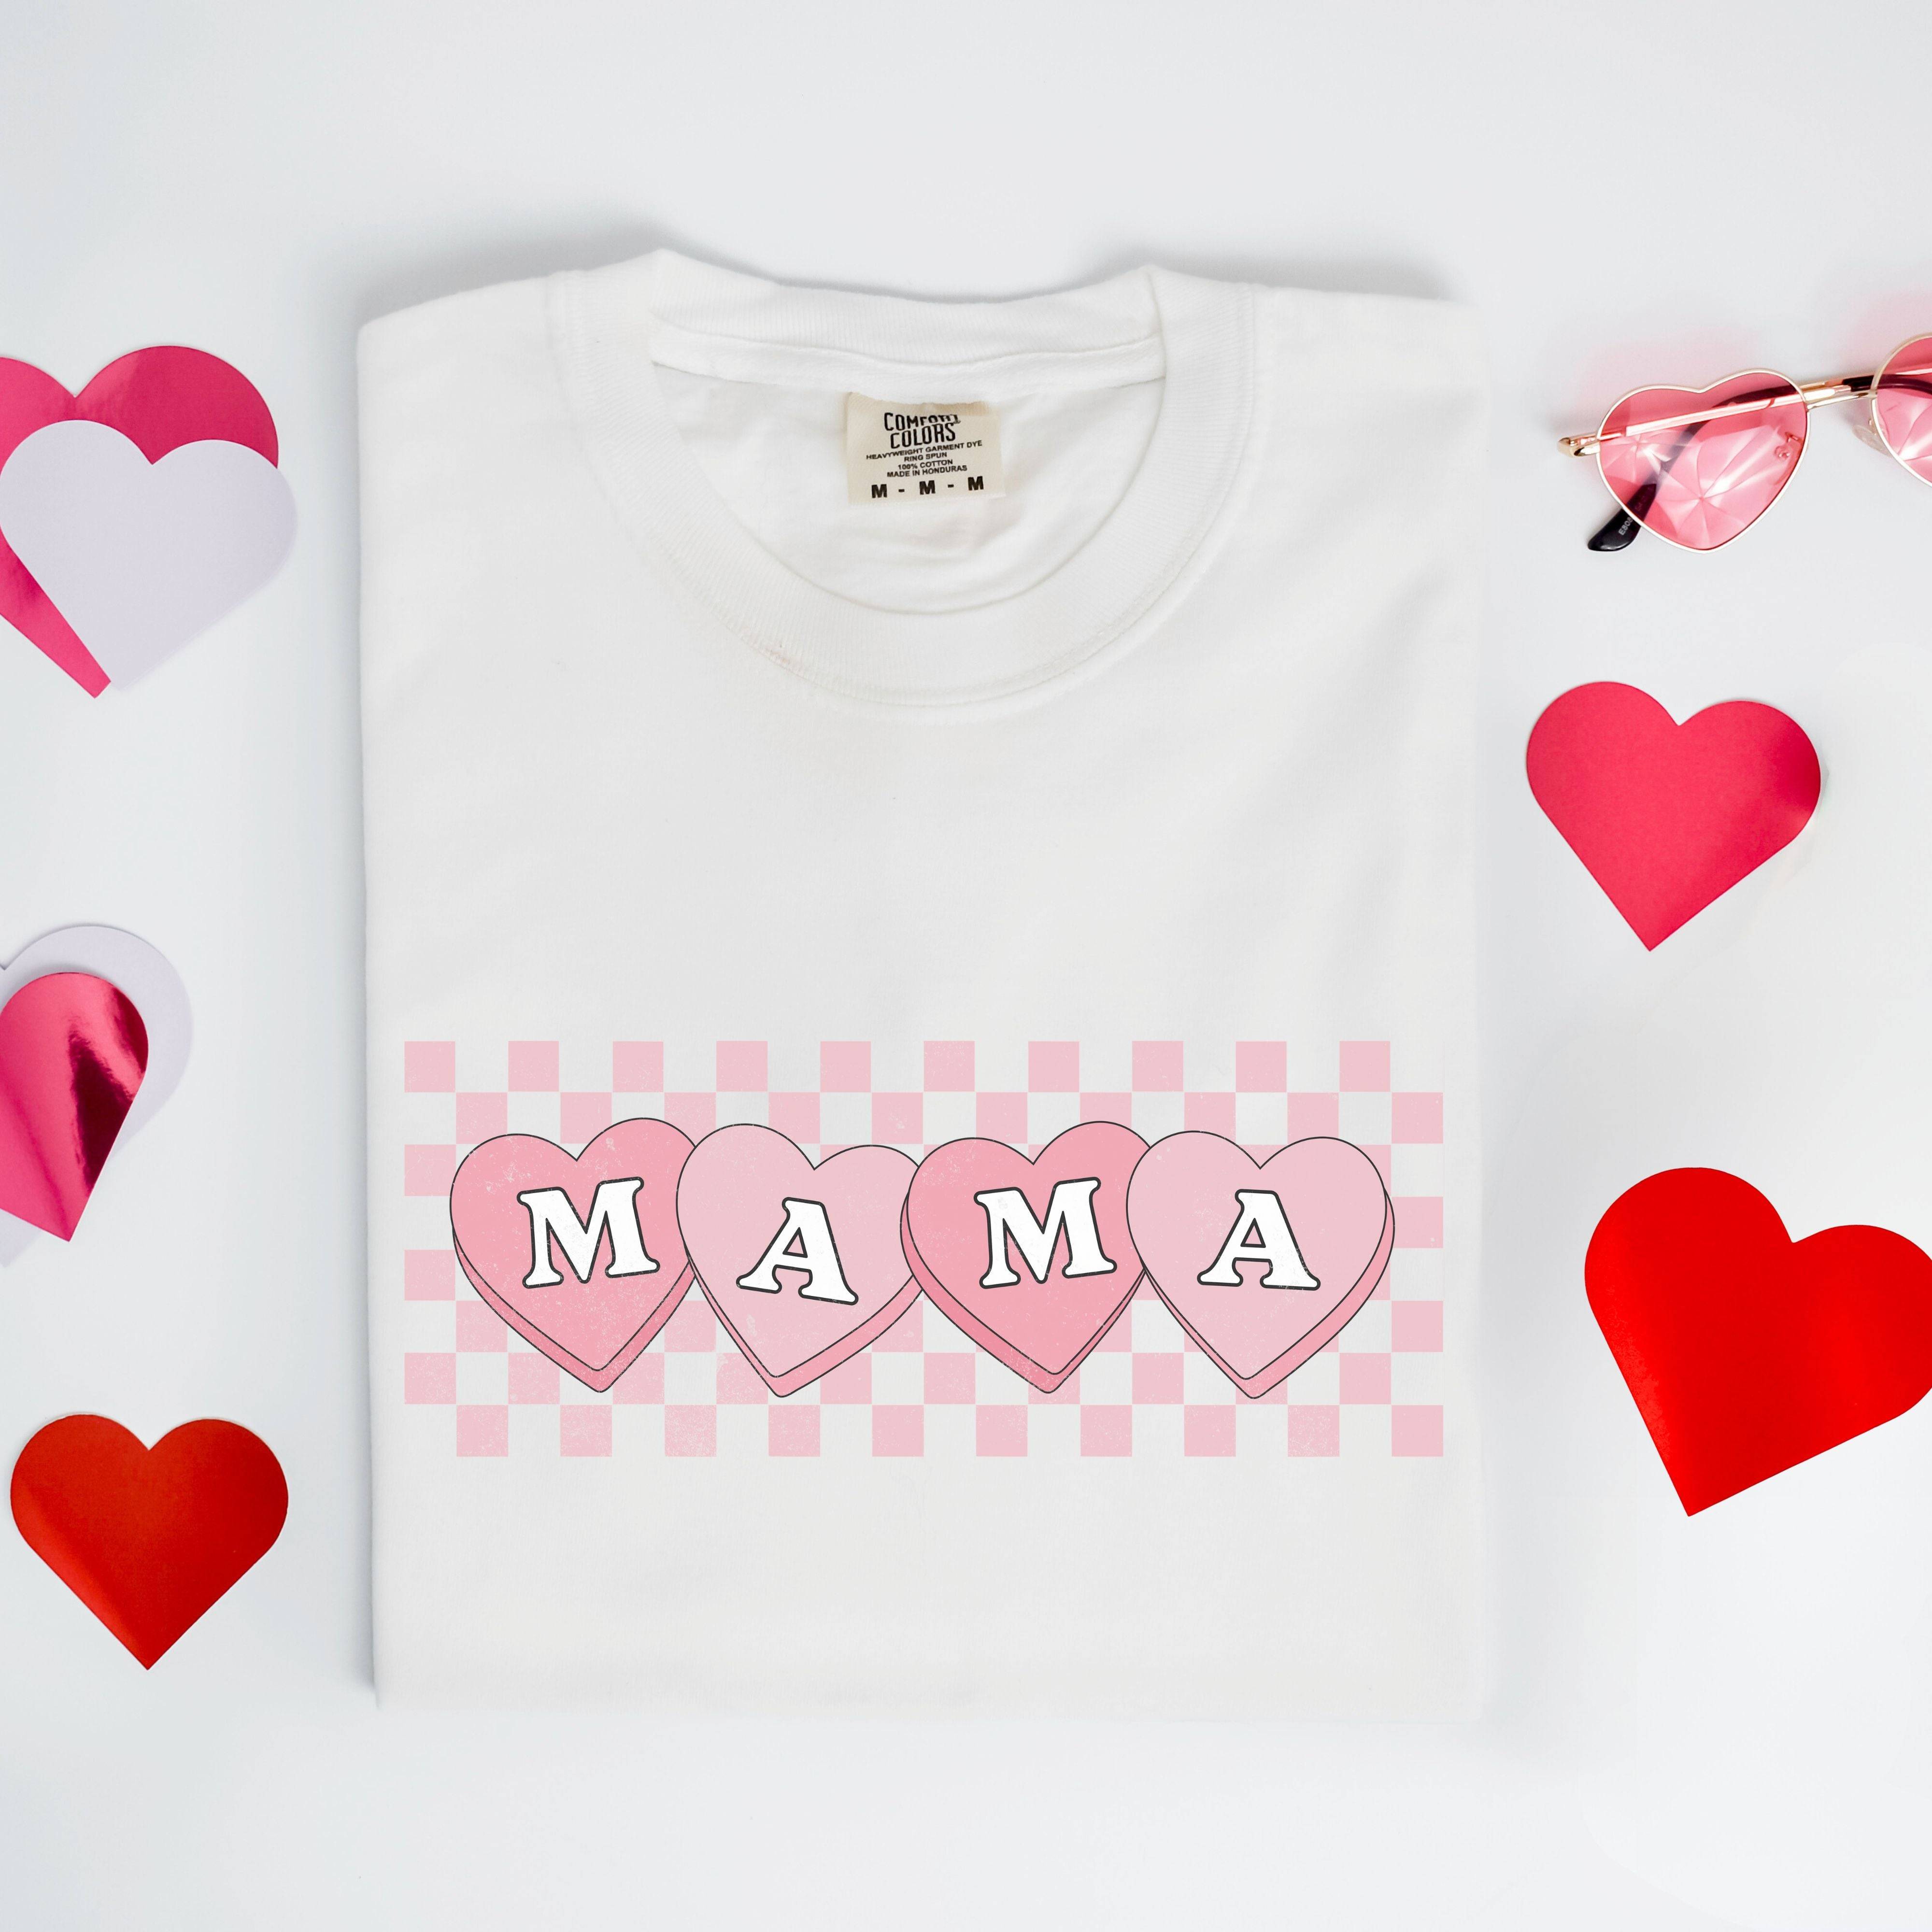 Mama Checkered Heart Uvdtf Decal — LAWS & OAKS